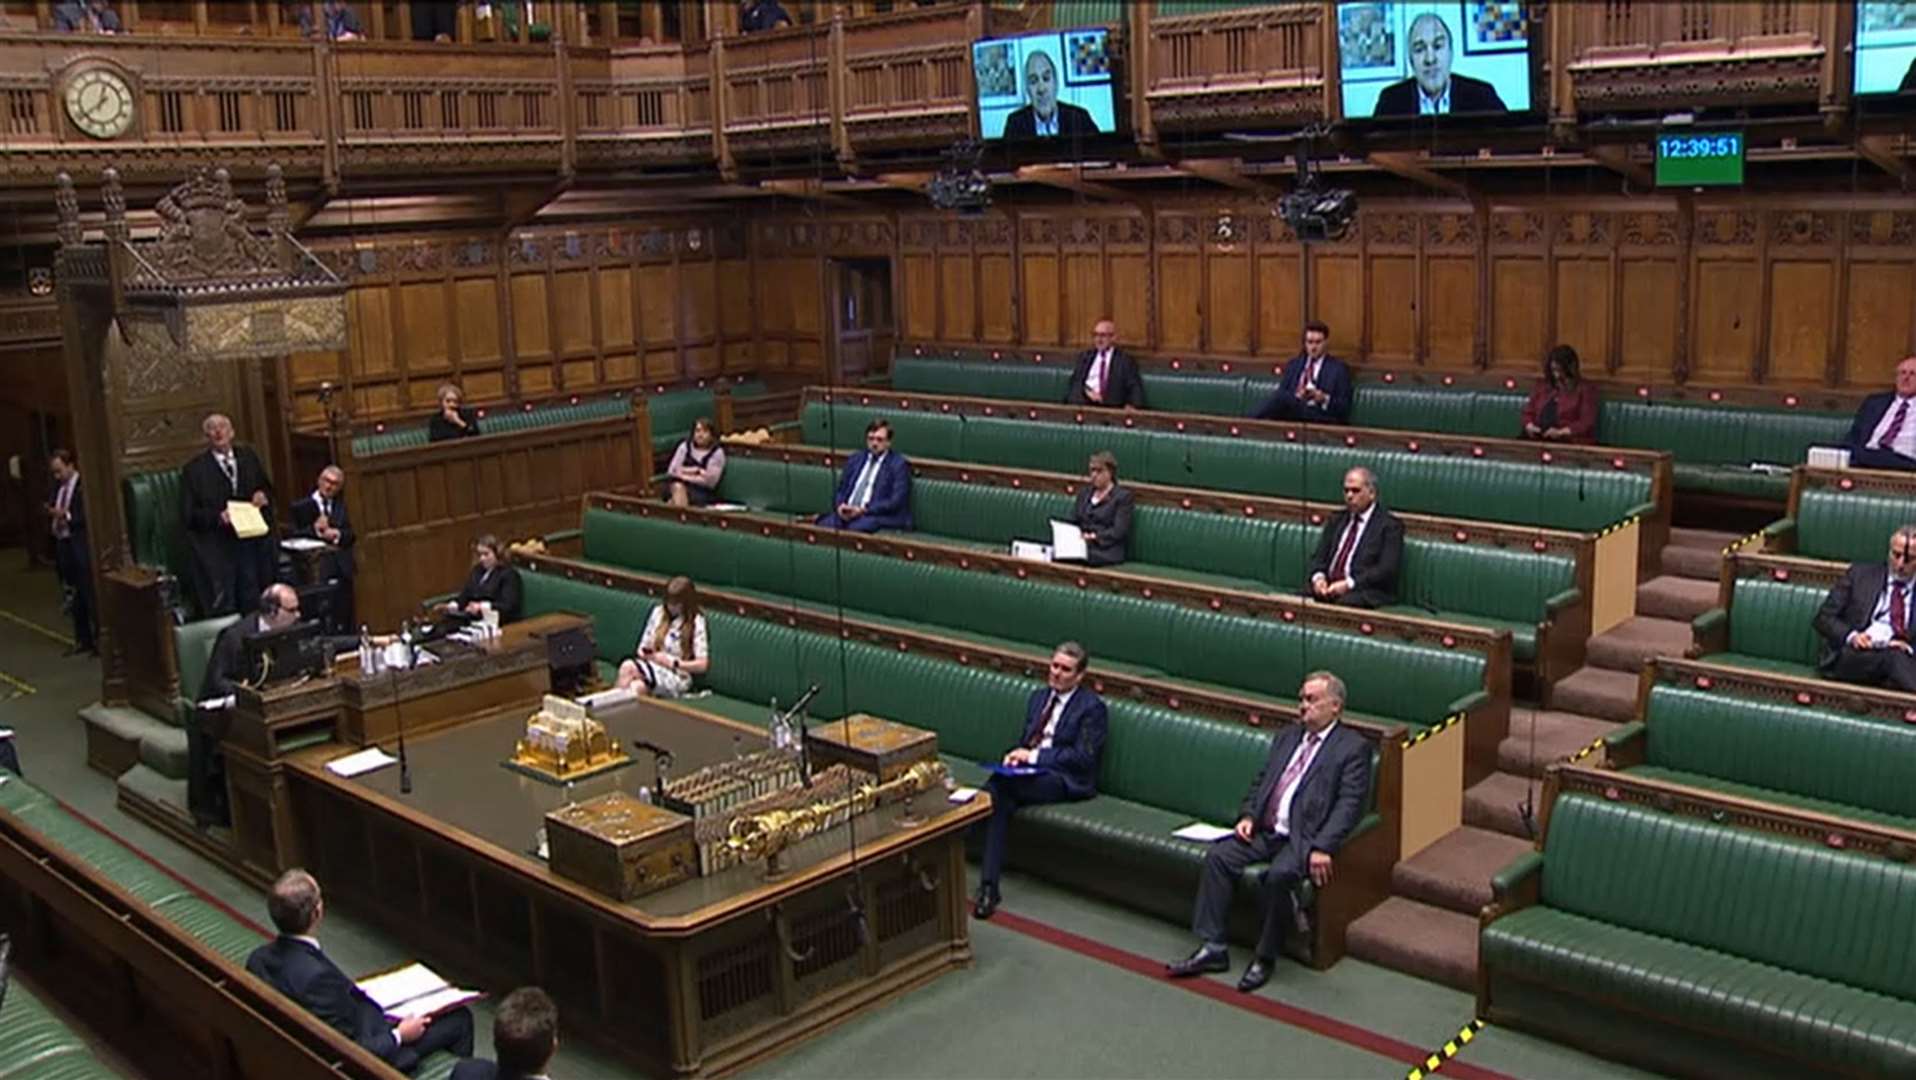 MPs can contribute remotely via screens around the chamber (House of Commons/PA)